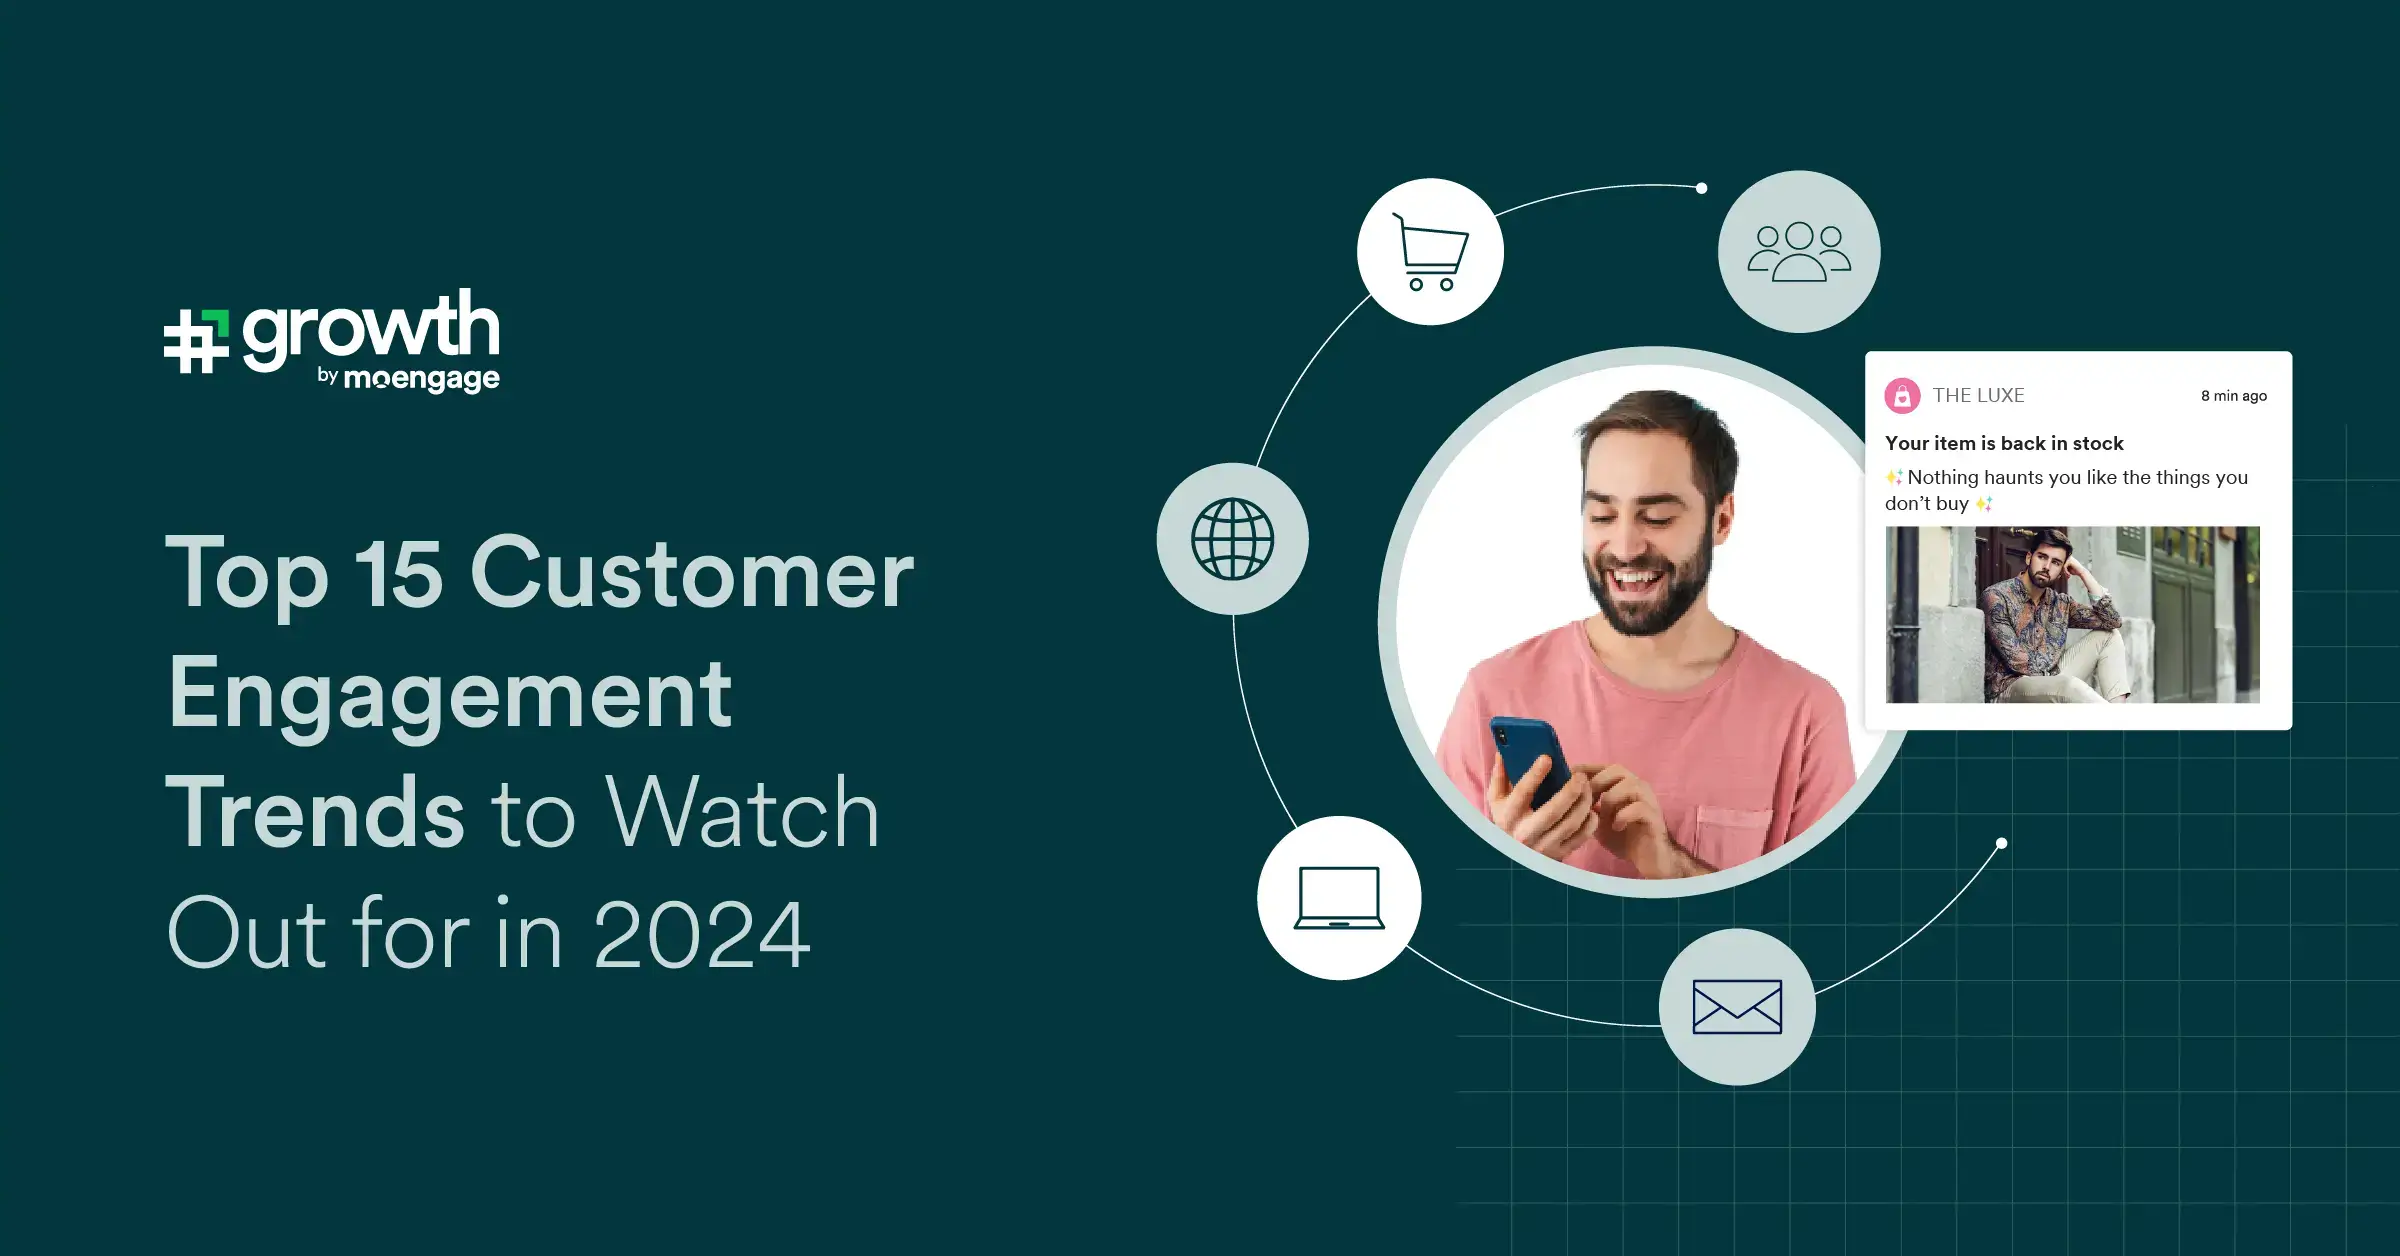 Top 15 Customer Engagement Trends to Watch Out for in 2024